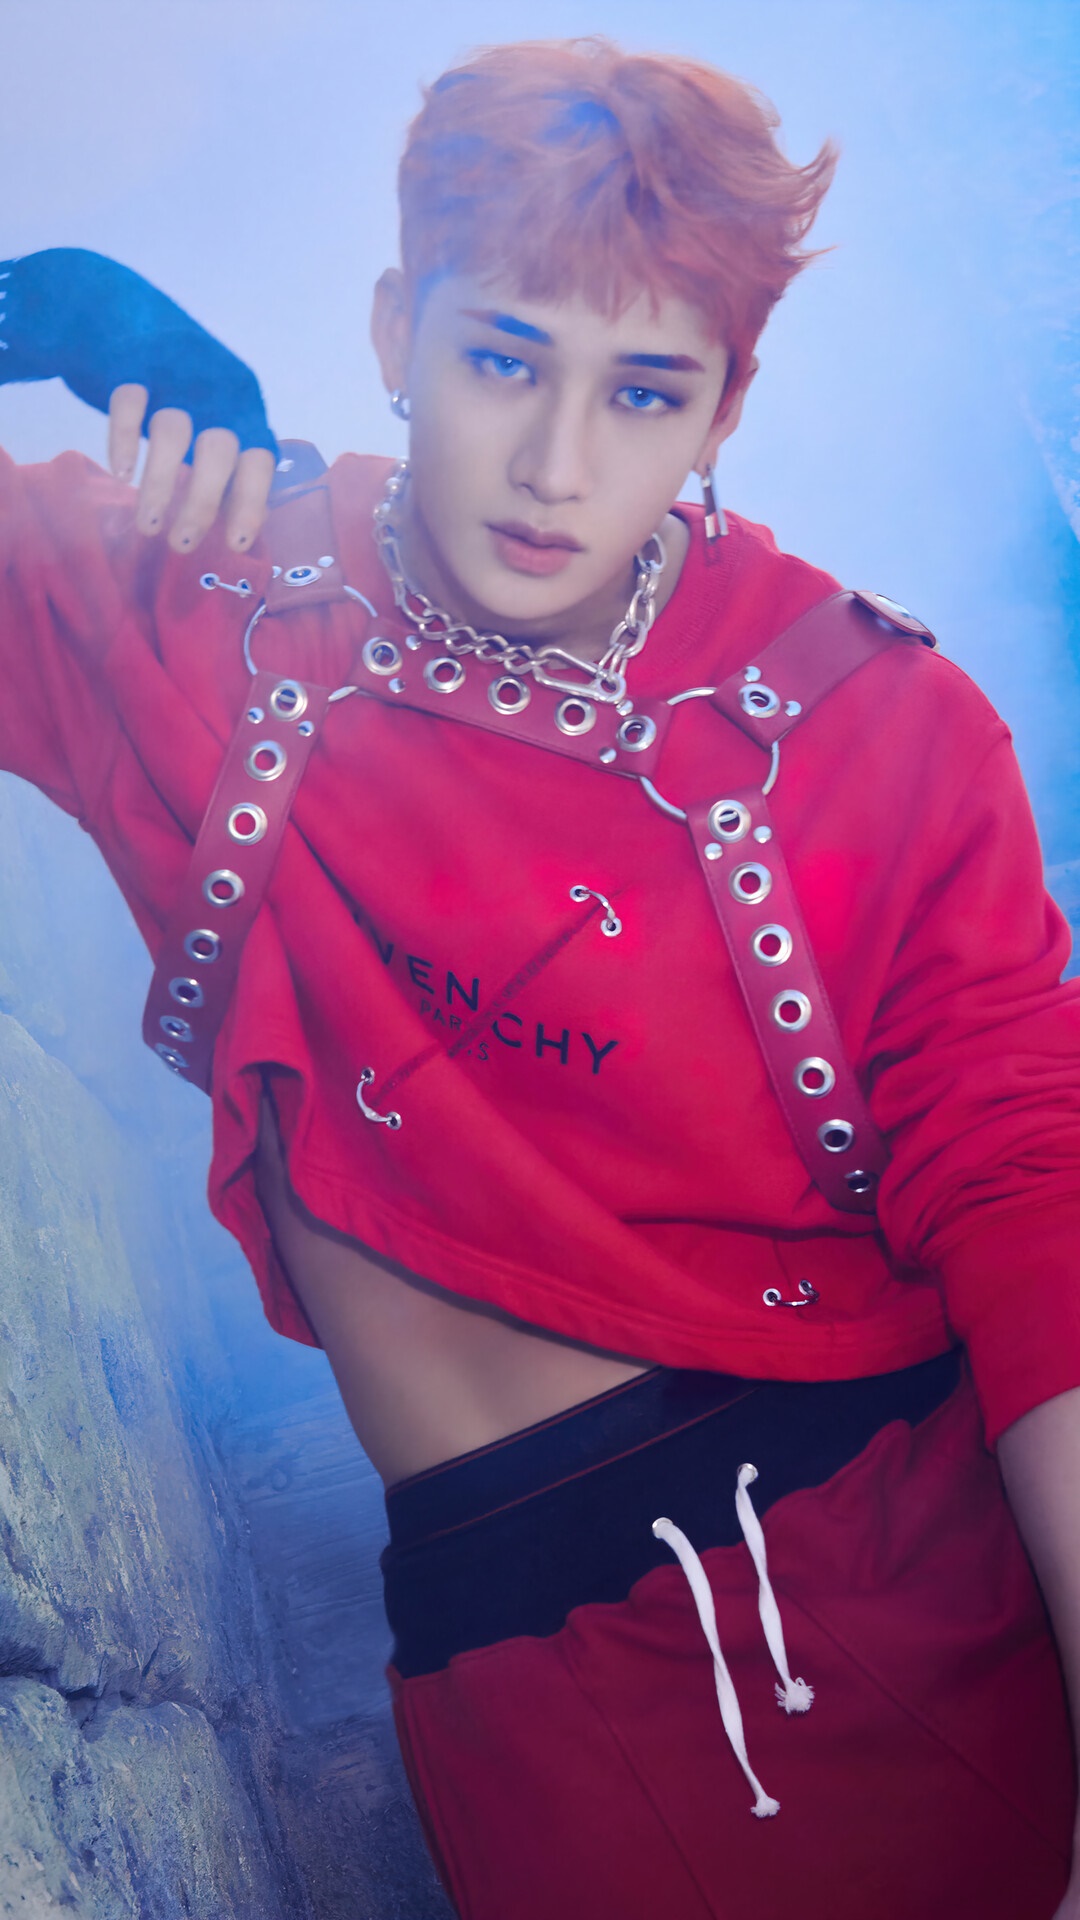 Mark wearing a red Givenchy hoodie and red pants with a harness - Bang Chan